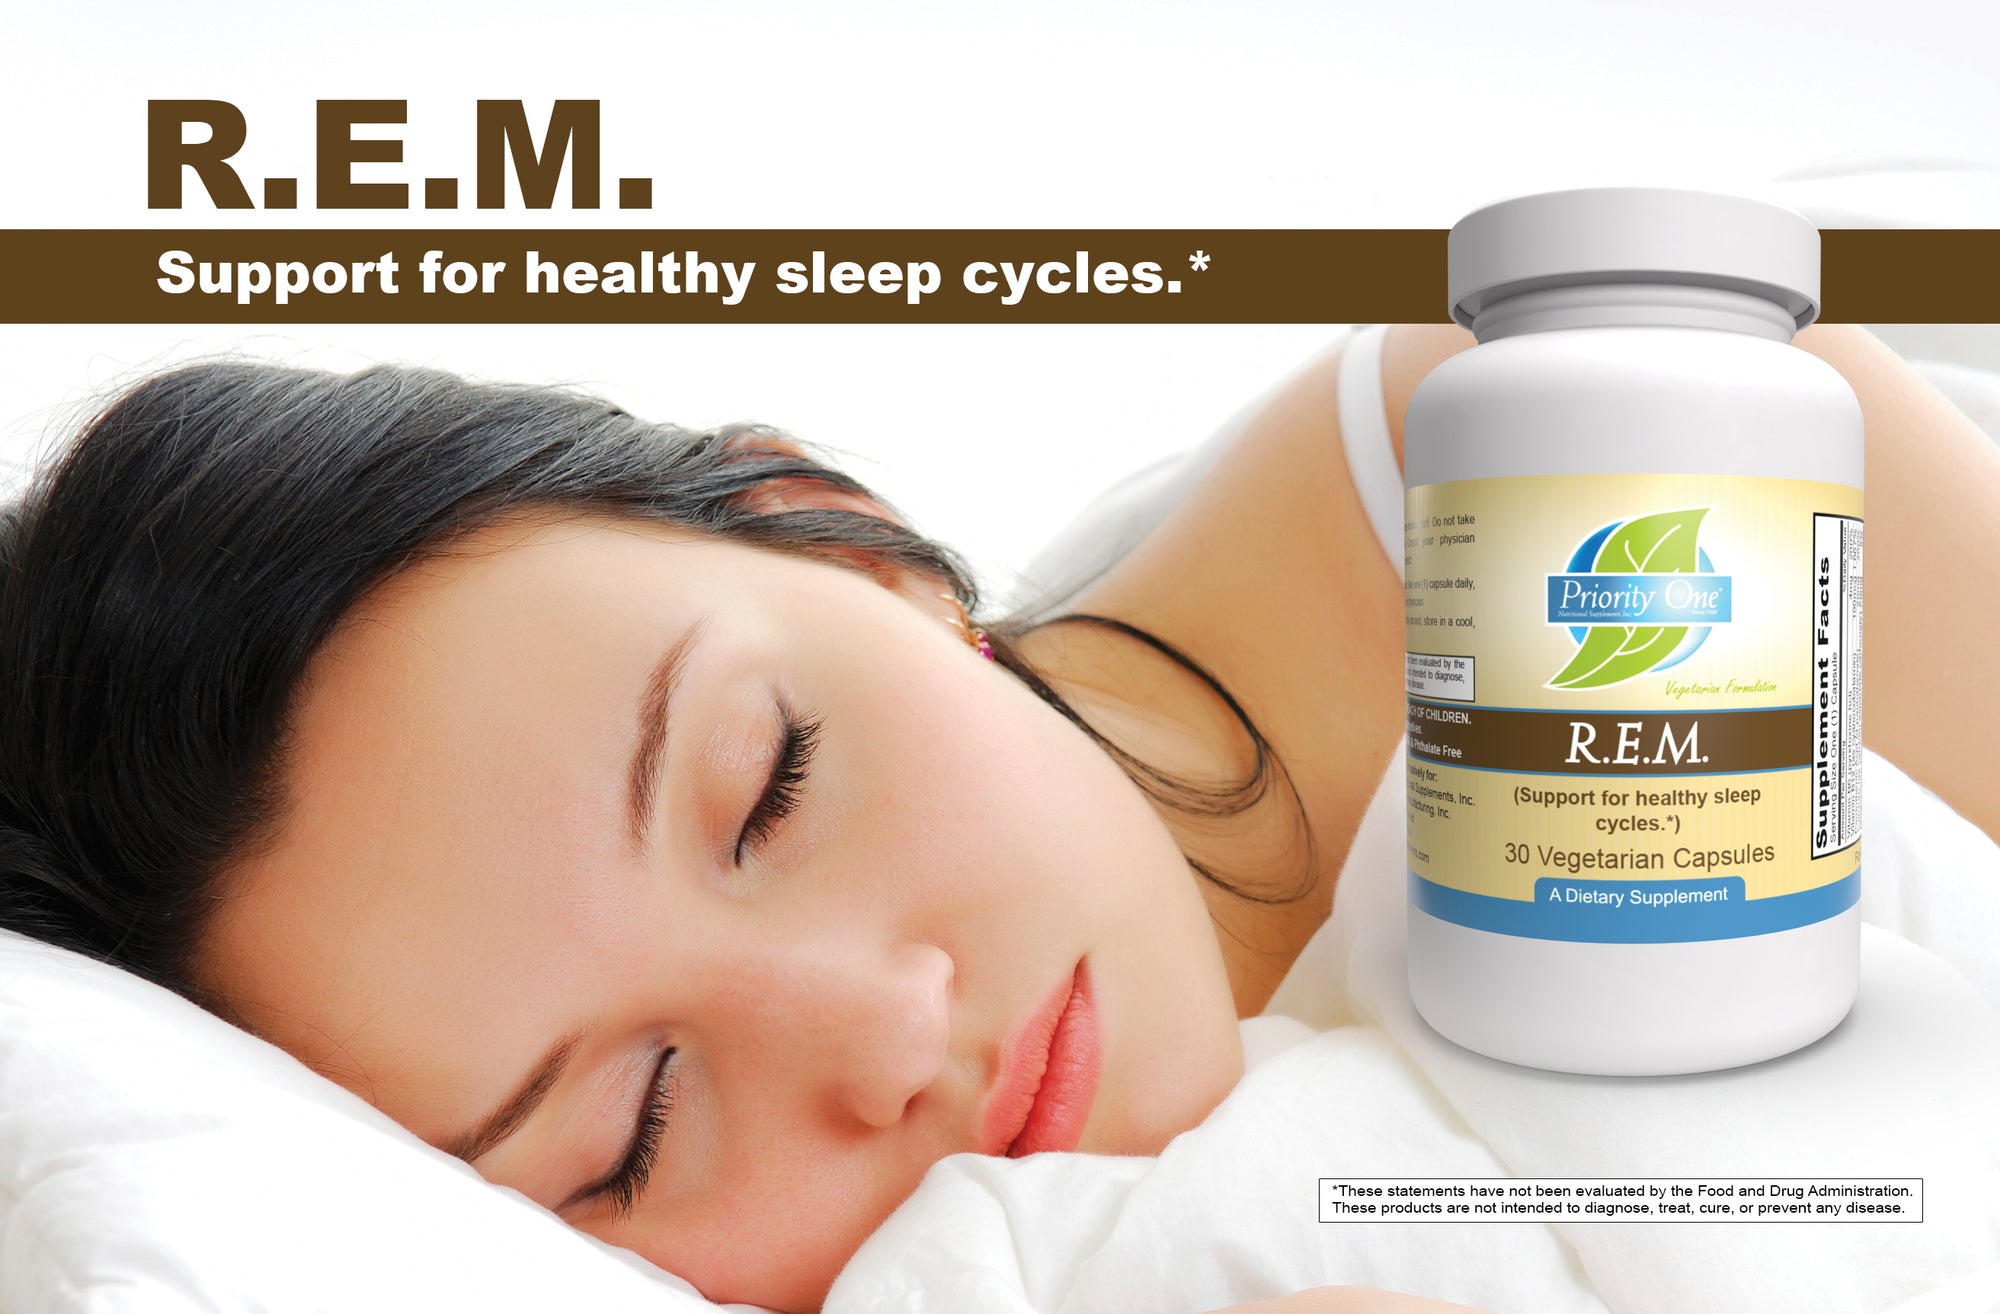 R.E.M. (30 Vegetarian Capsules) The R.E.M sleep supplement is a vegetarian sleep aid designed to support healthy sleep patterns.*